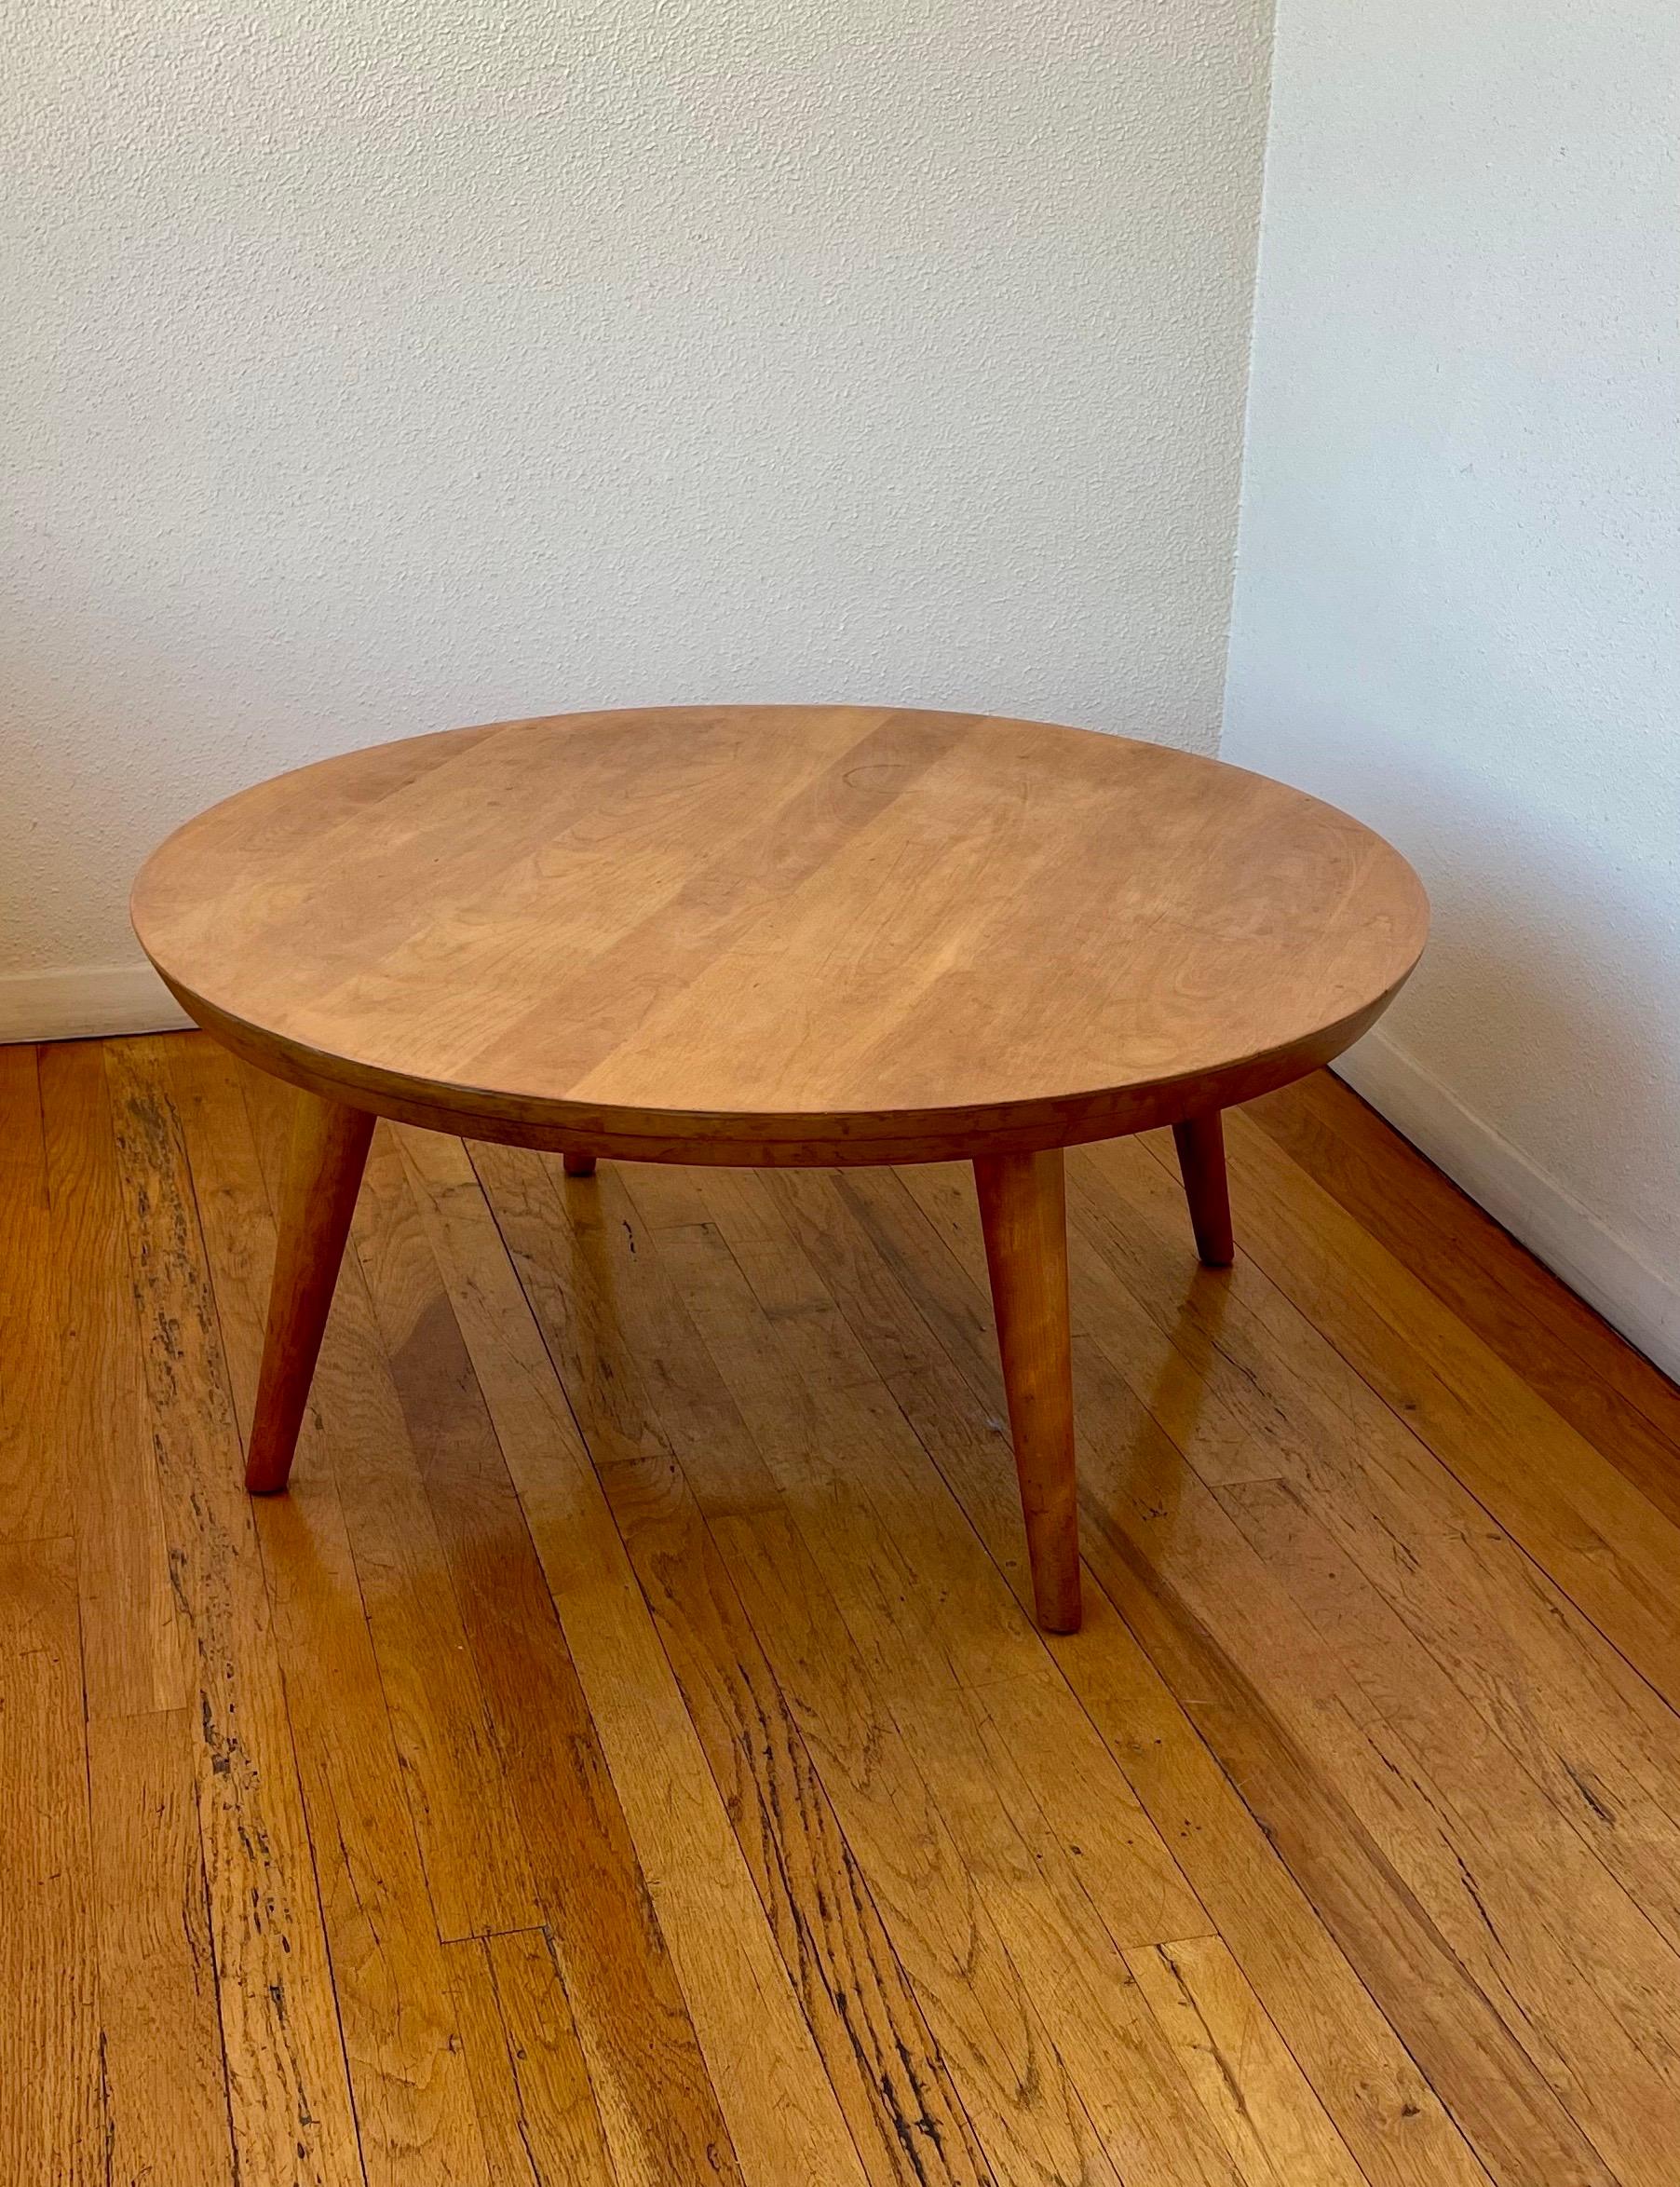 20th Century American Mid-Century Modern Solid Honey Maple Coffee Table by Russel Wright